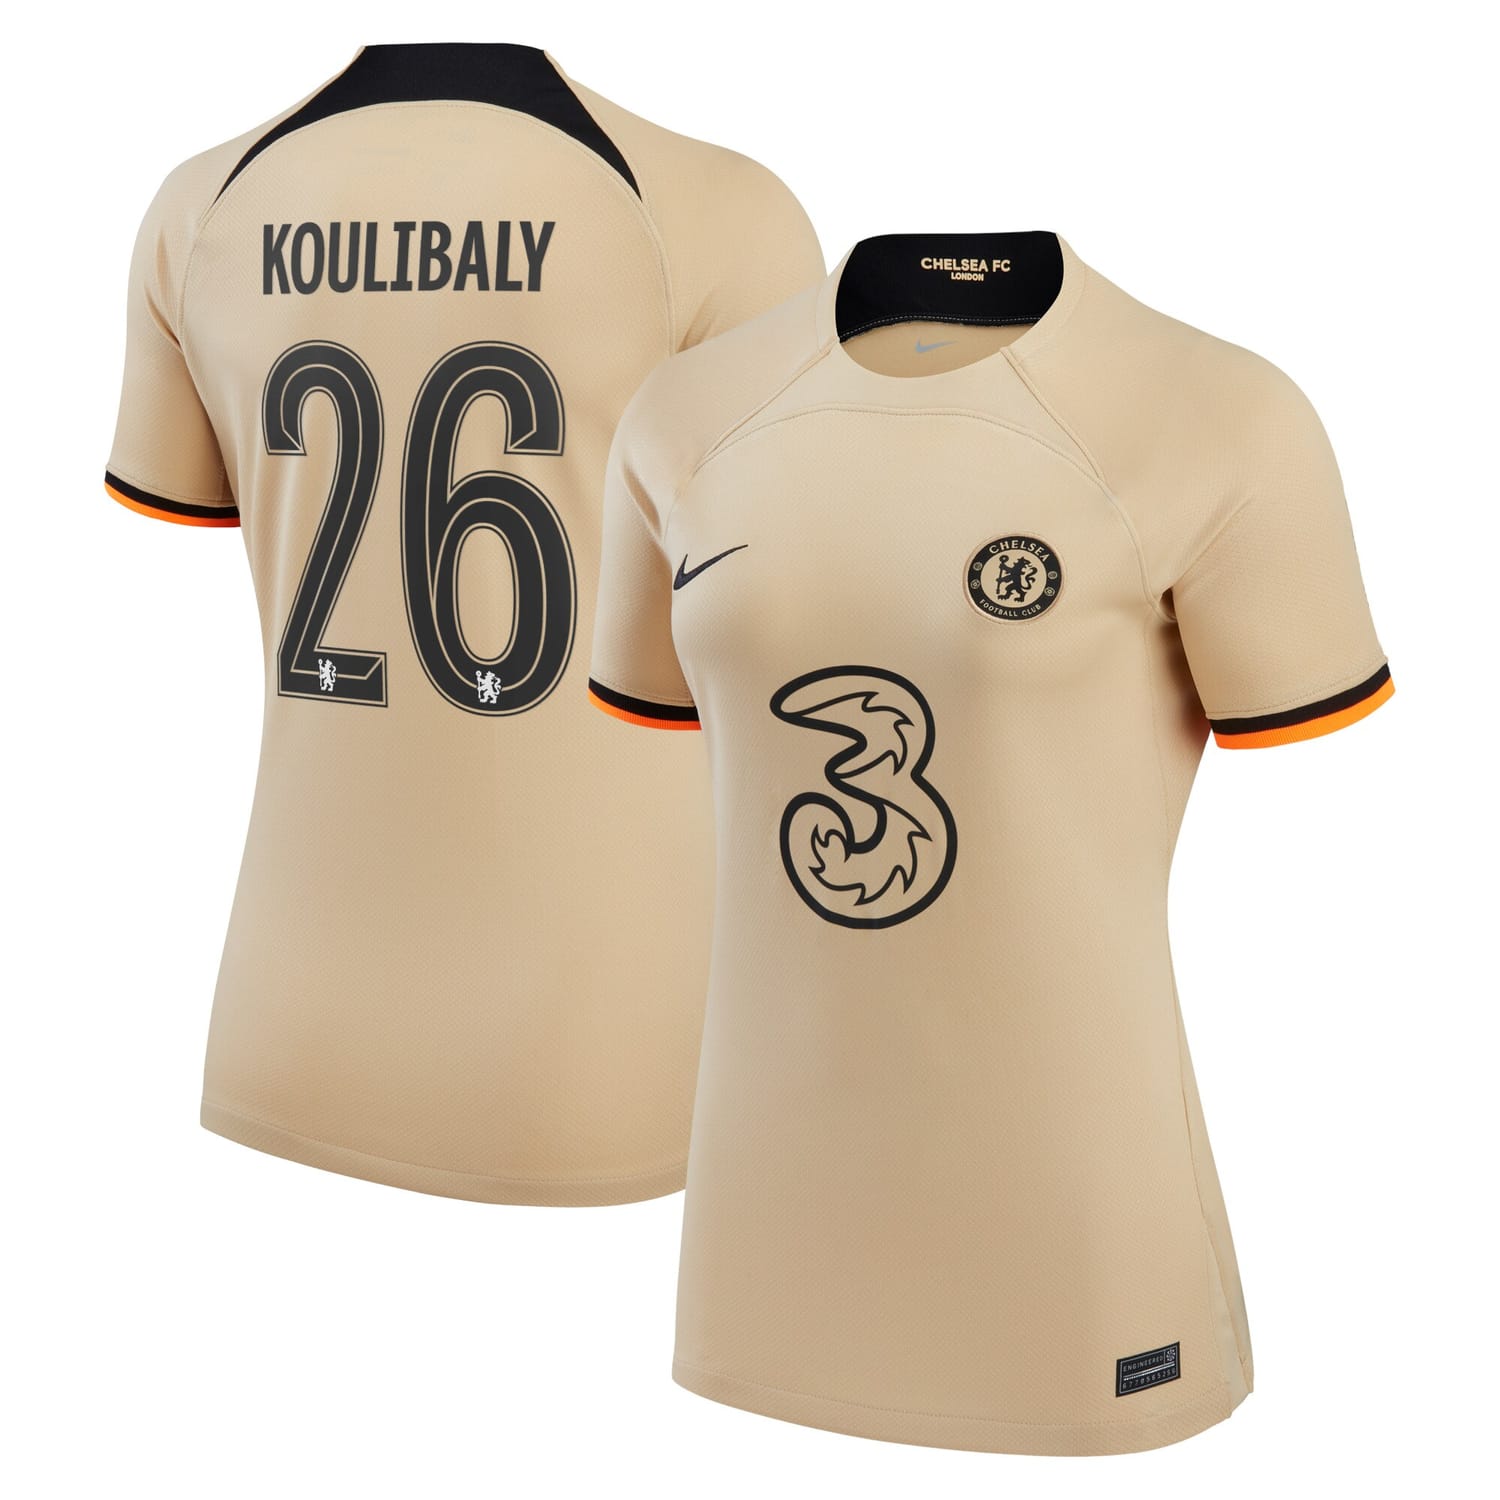 Premier League Chelsea Third Cup Jersey Shirt 2022-23 player Kalidou Koulibaly 26 printing for Women